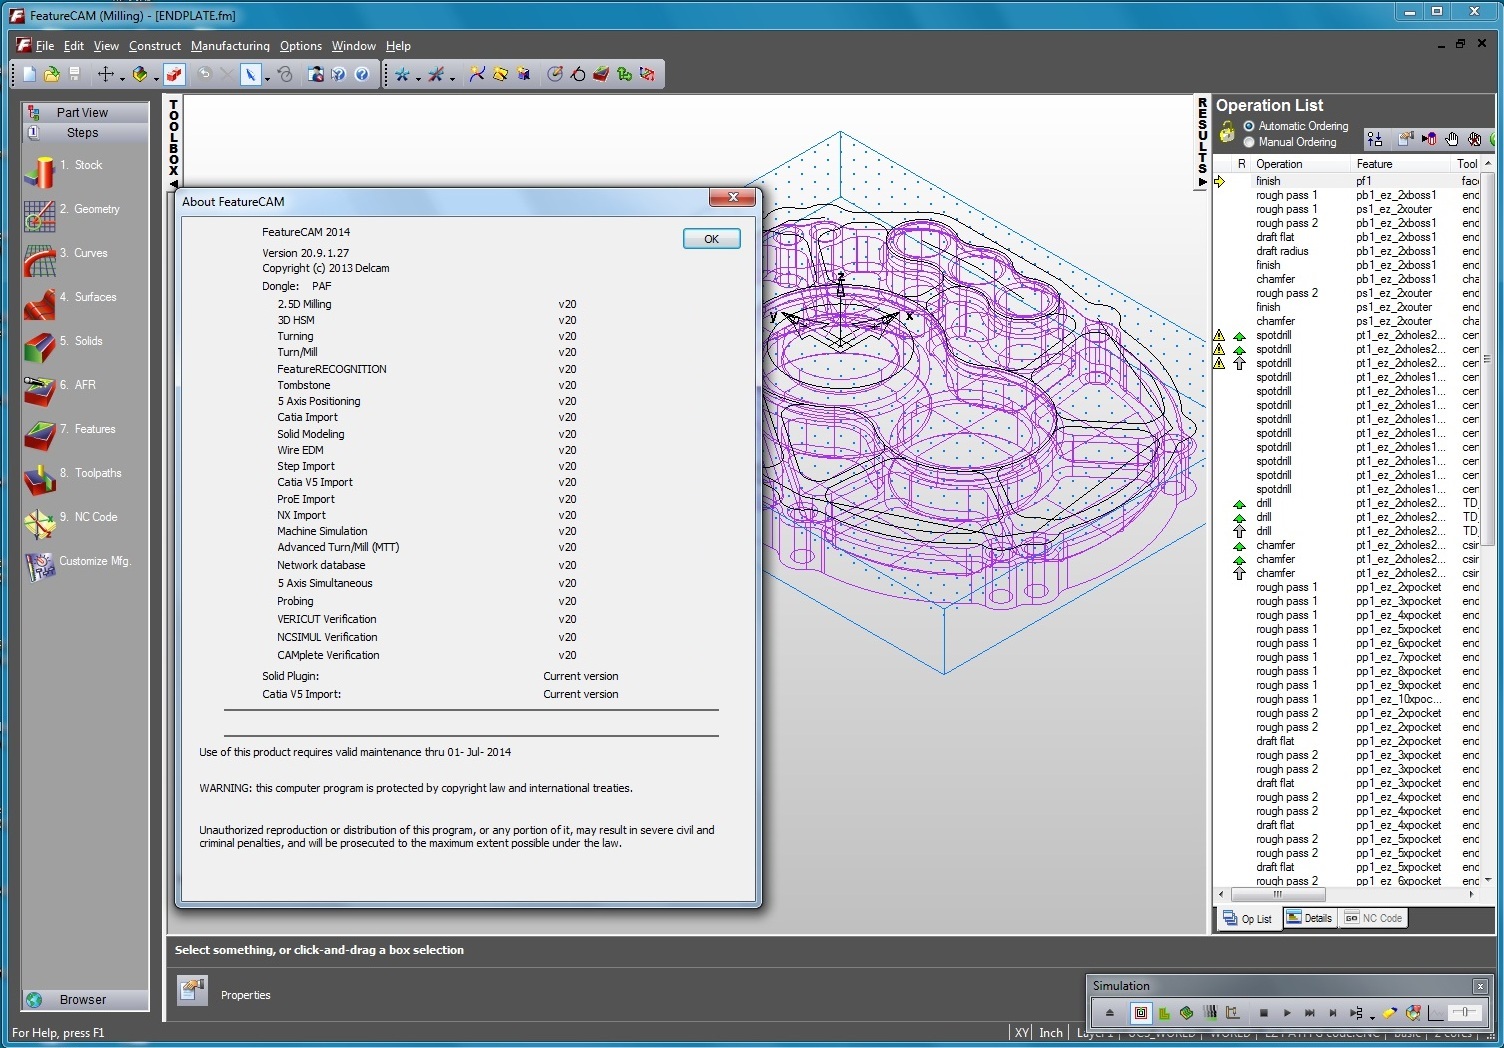 autocad 2013 for mac student edition